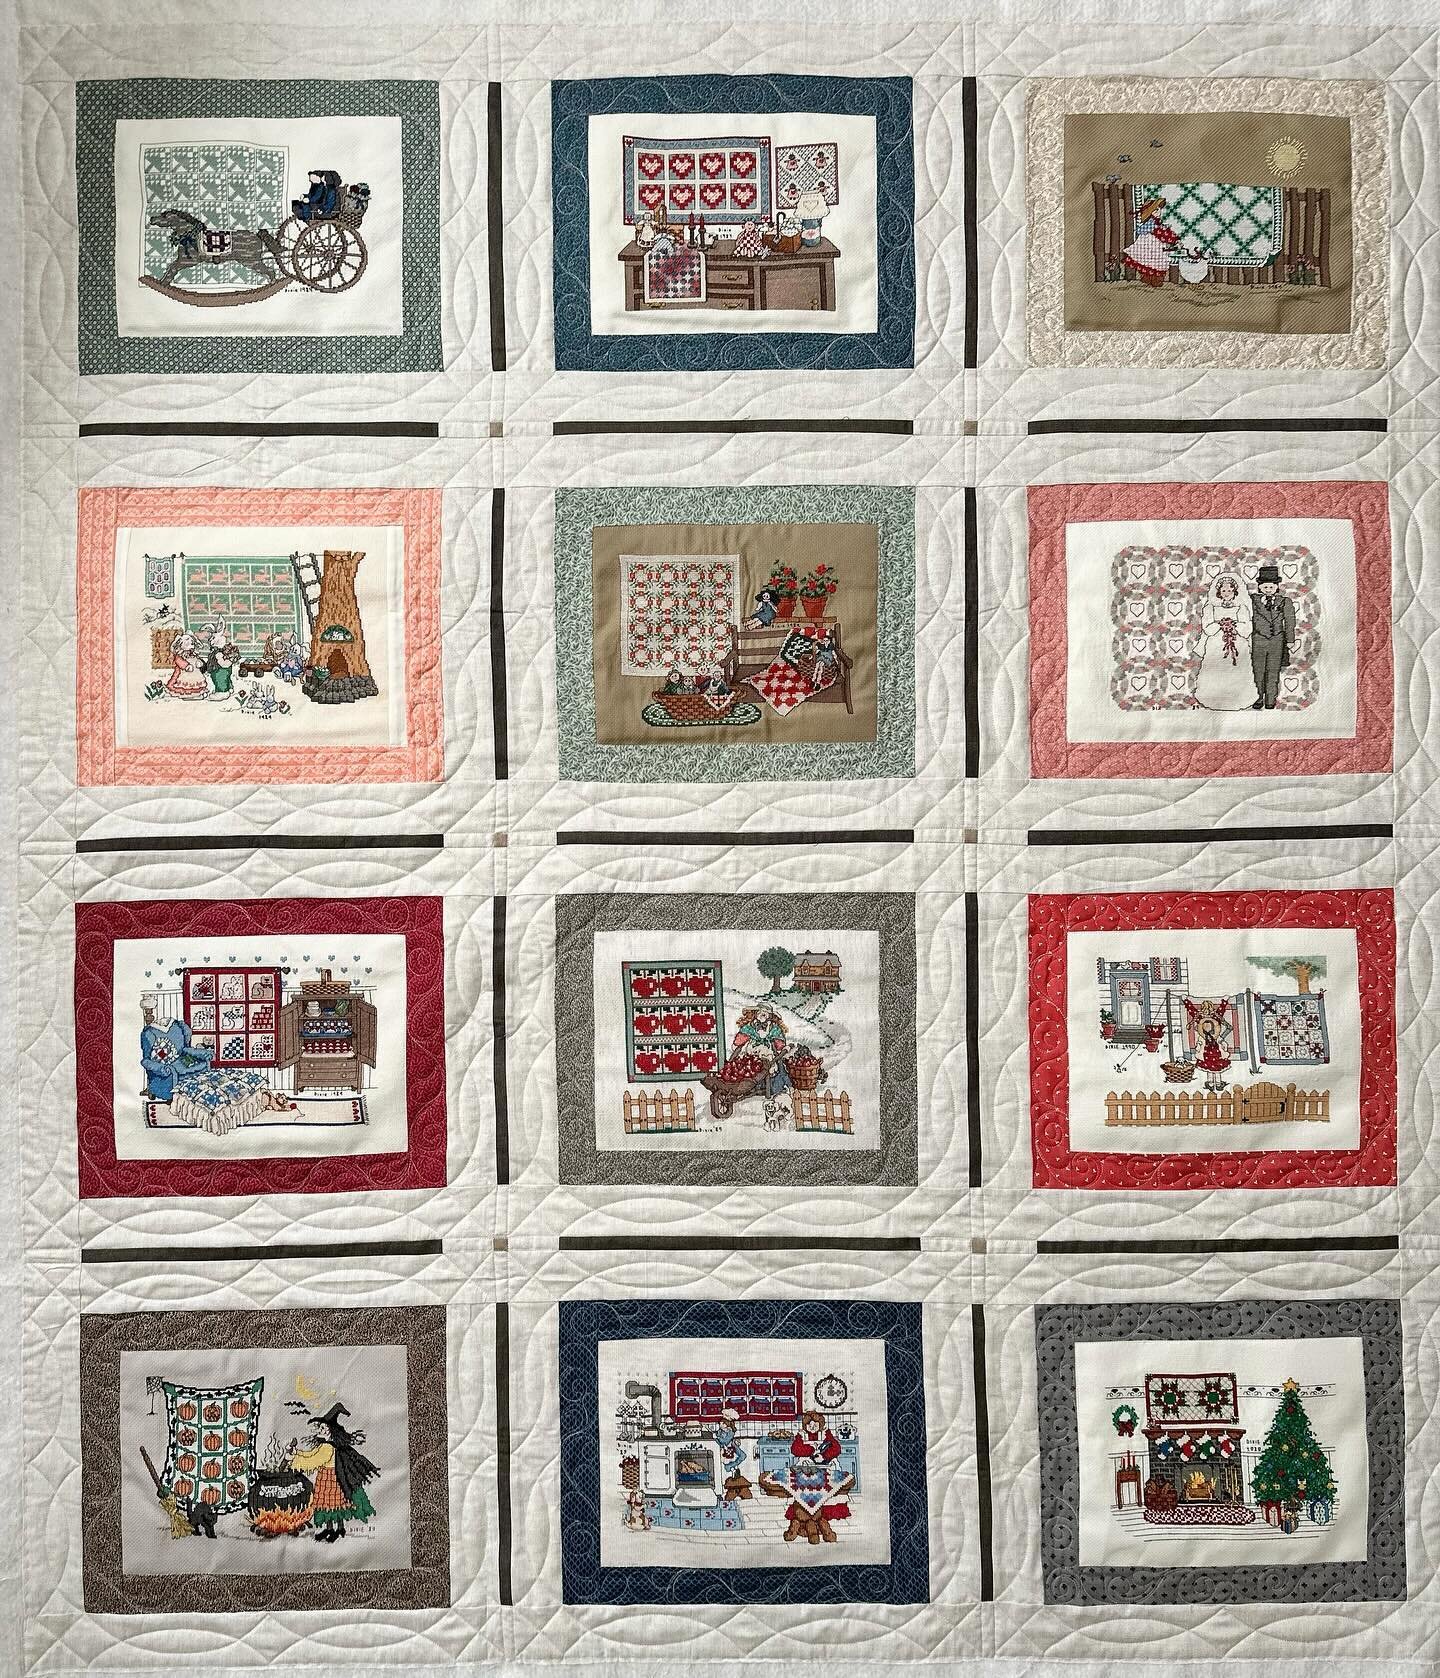 Excited to share this amazing quilt with you!!! Denise&rsquo;s mom worked on these incredible cross stitched blocks and Denise decided to add sashing to them and make them into a quilt.  Look at all of those tiny and beautifully stitched quilts.

I w